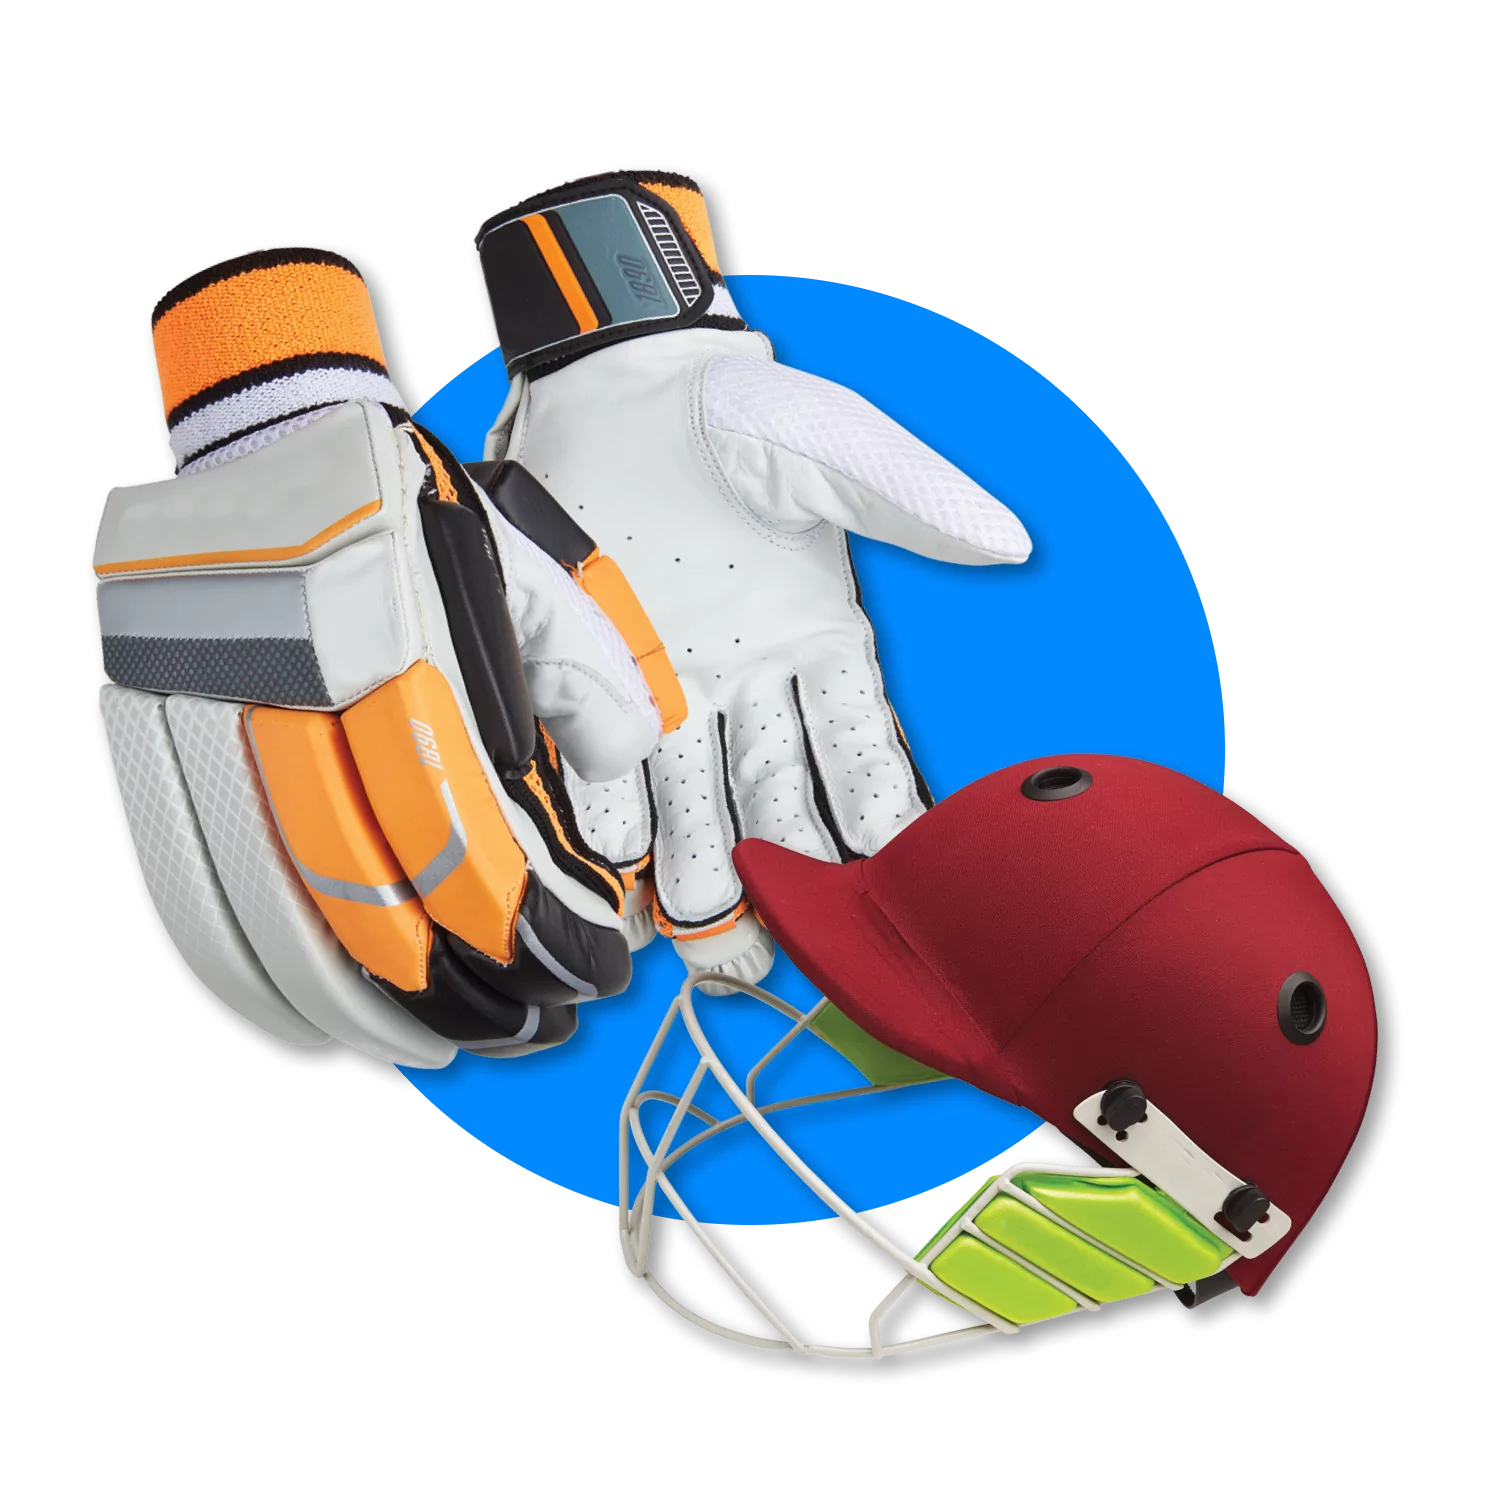 Learn about the equipment for playing cricket.